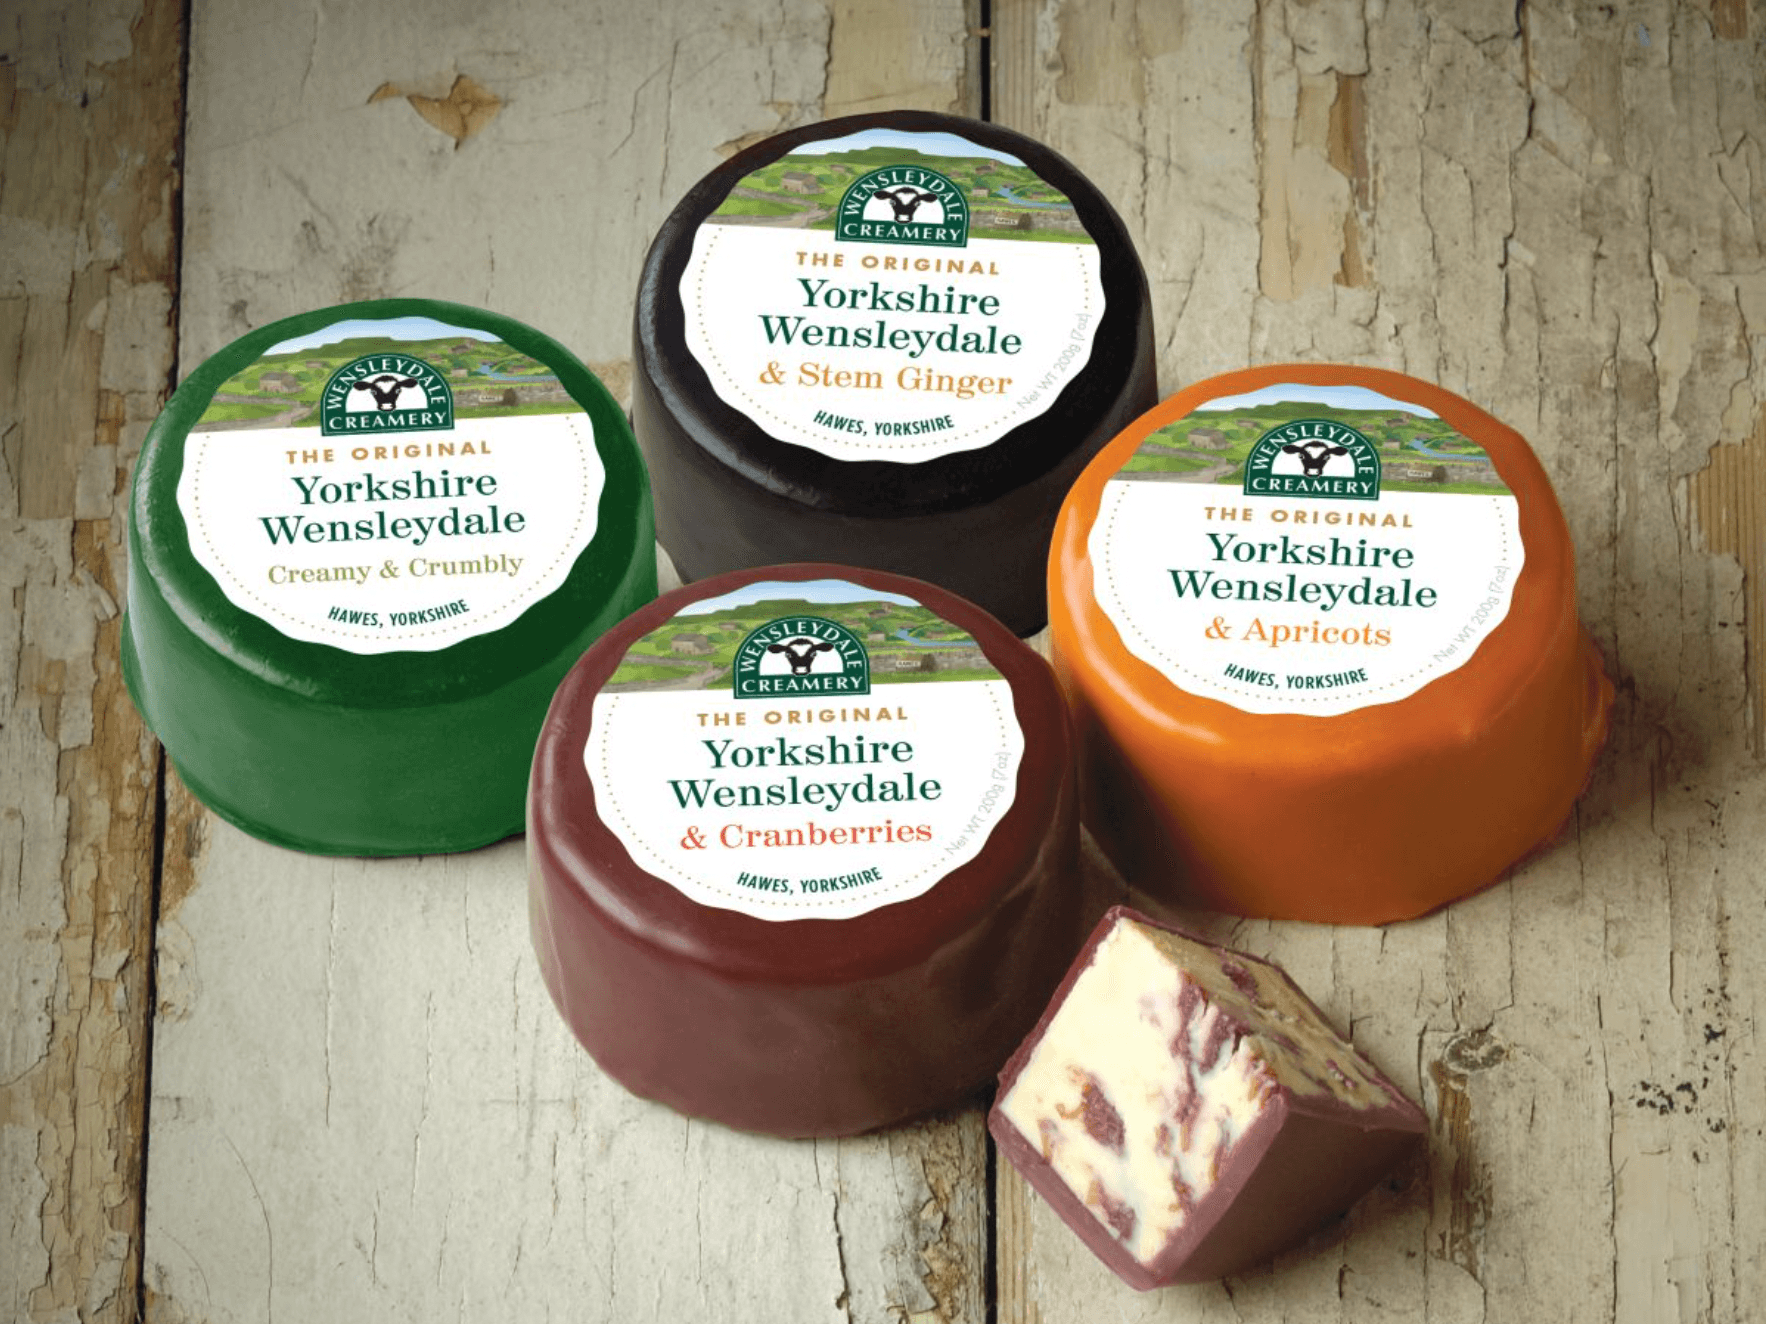 Wensleydale Cheese Board 800g (approx cheese weight) serves 6-8 people - Celebration Cheeses